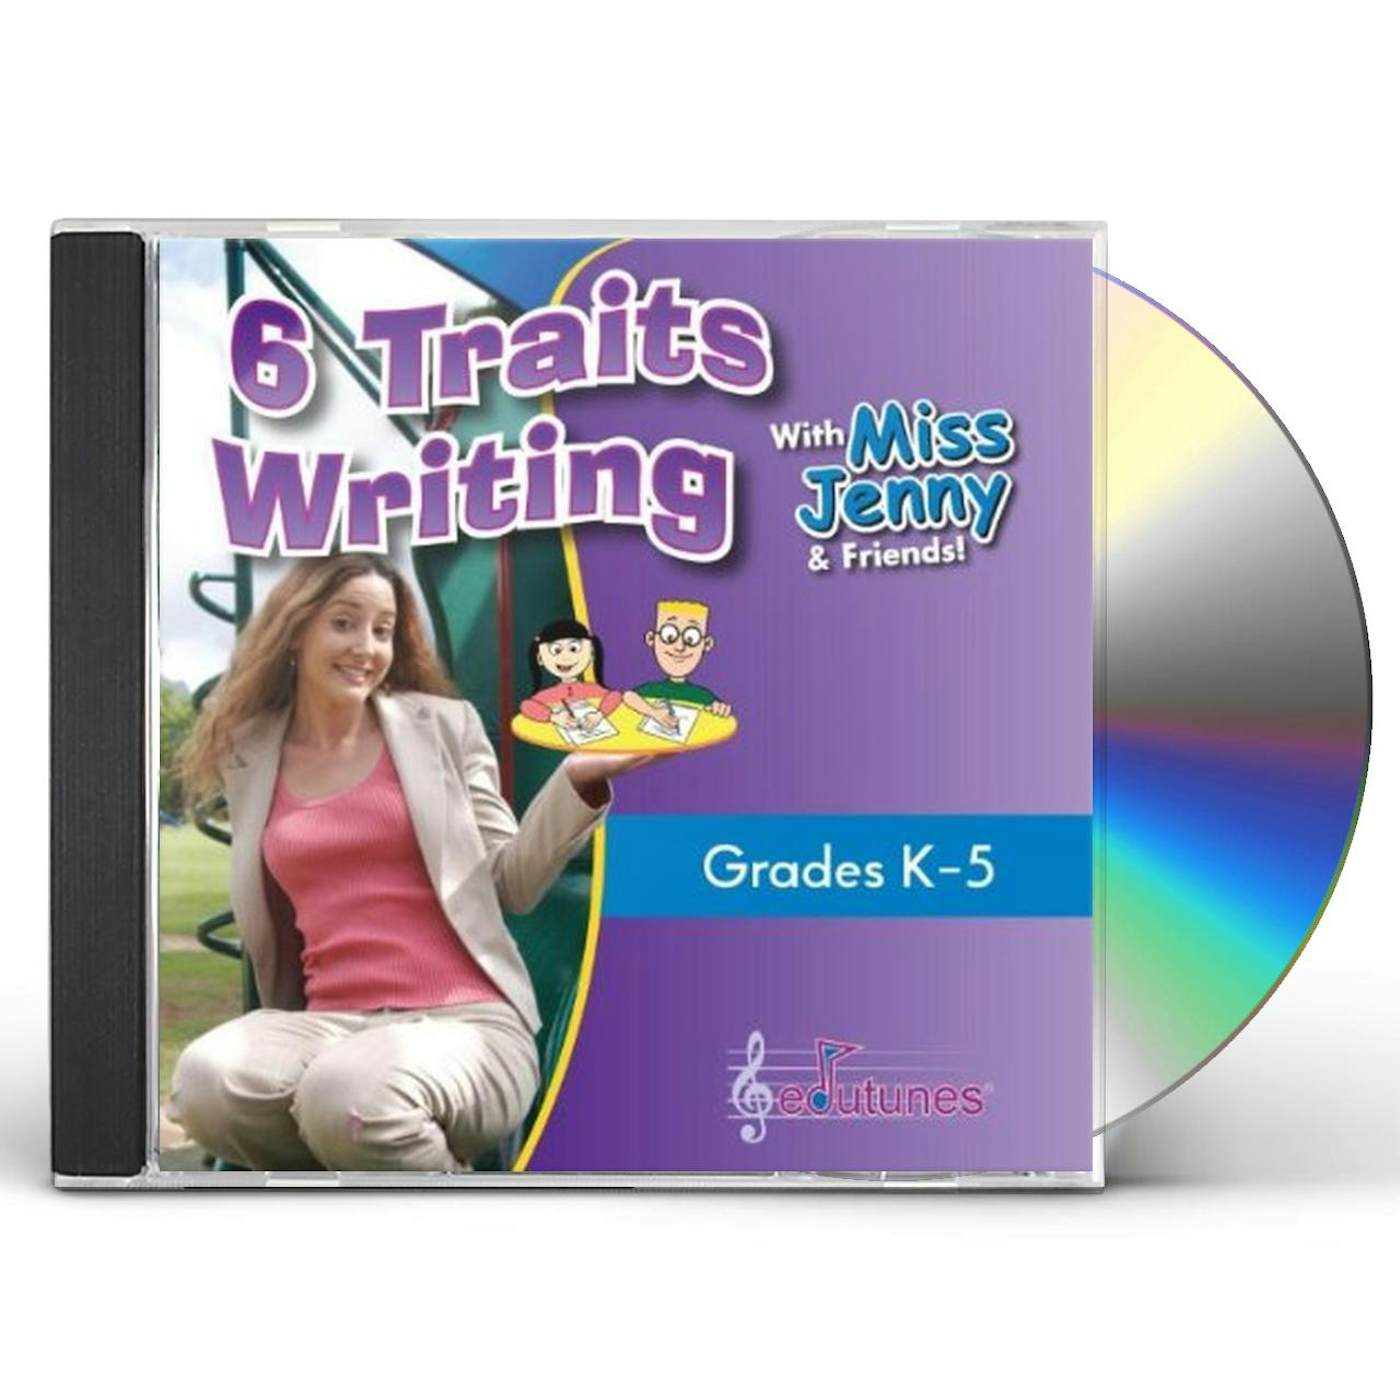 6 TRAITS WRITING WITH MISS JENNY & FRIENDS CD